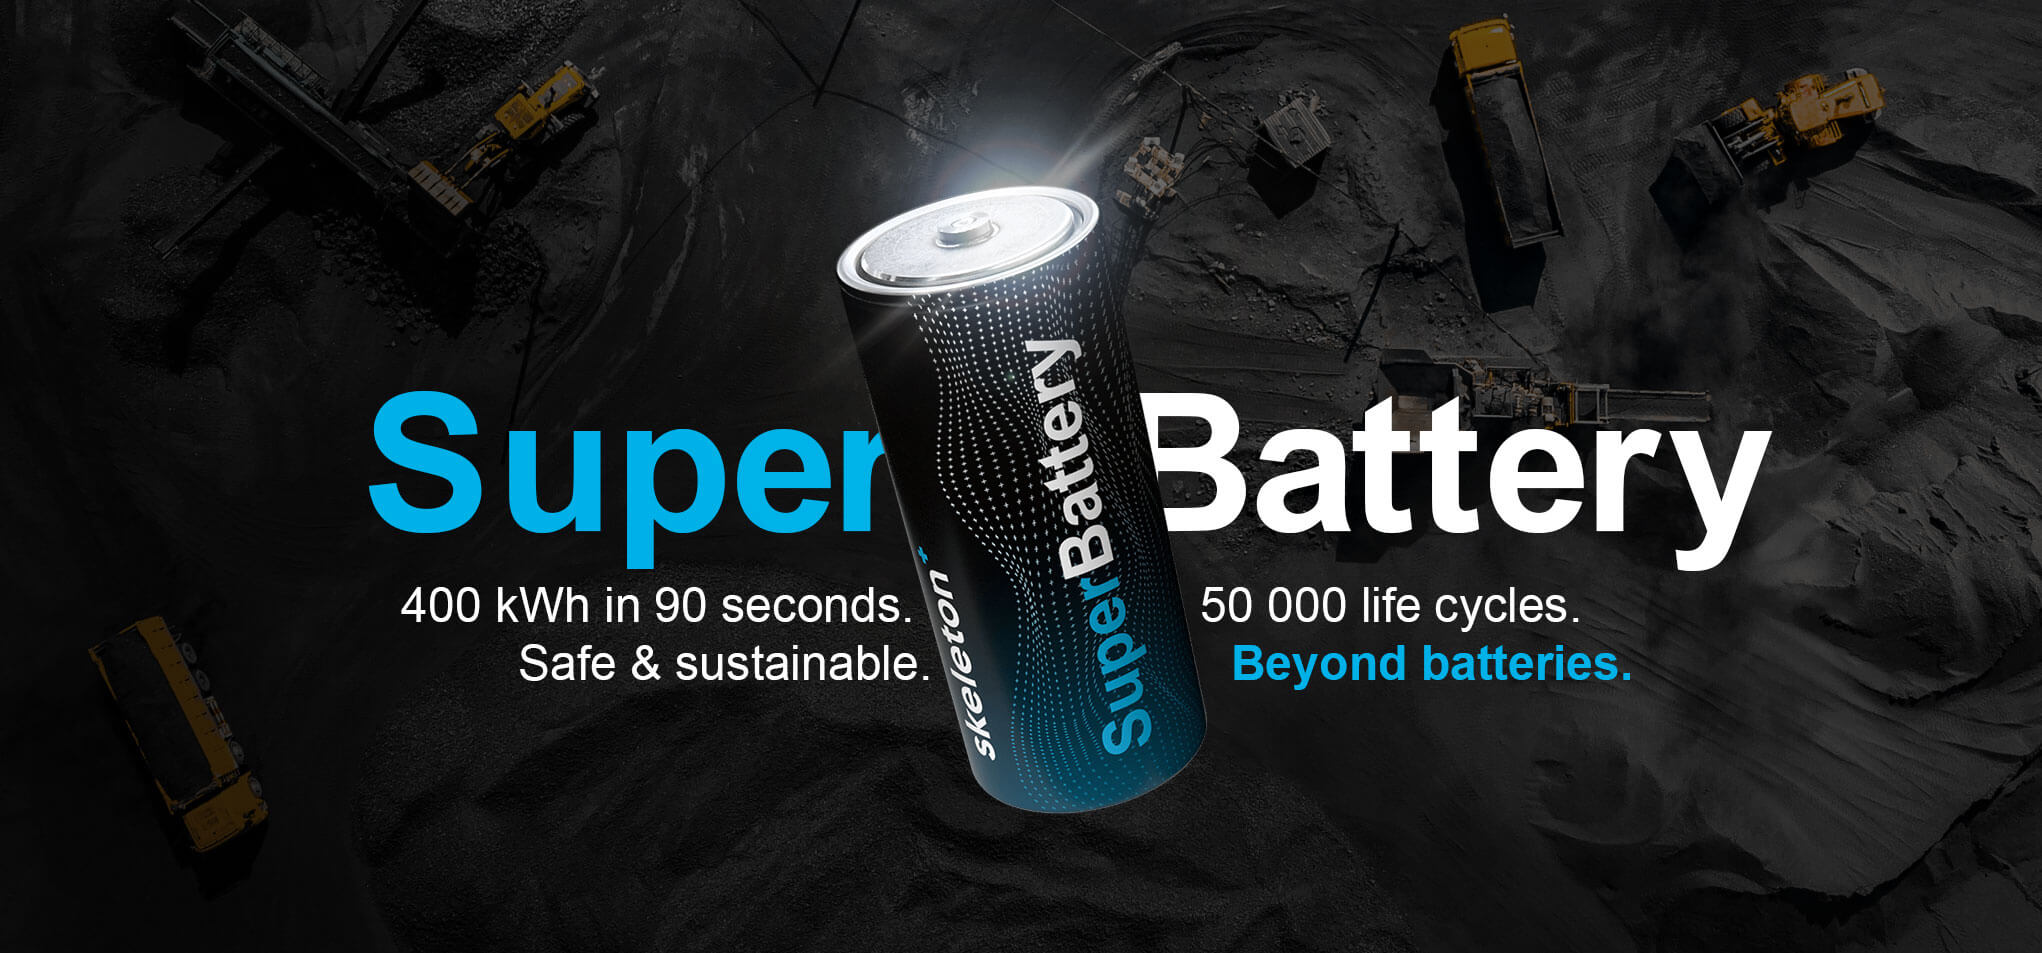 Skeleton launches SuperBattery